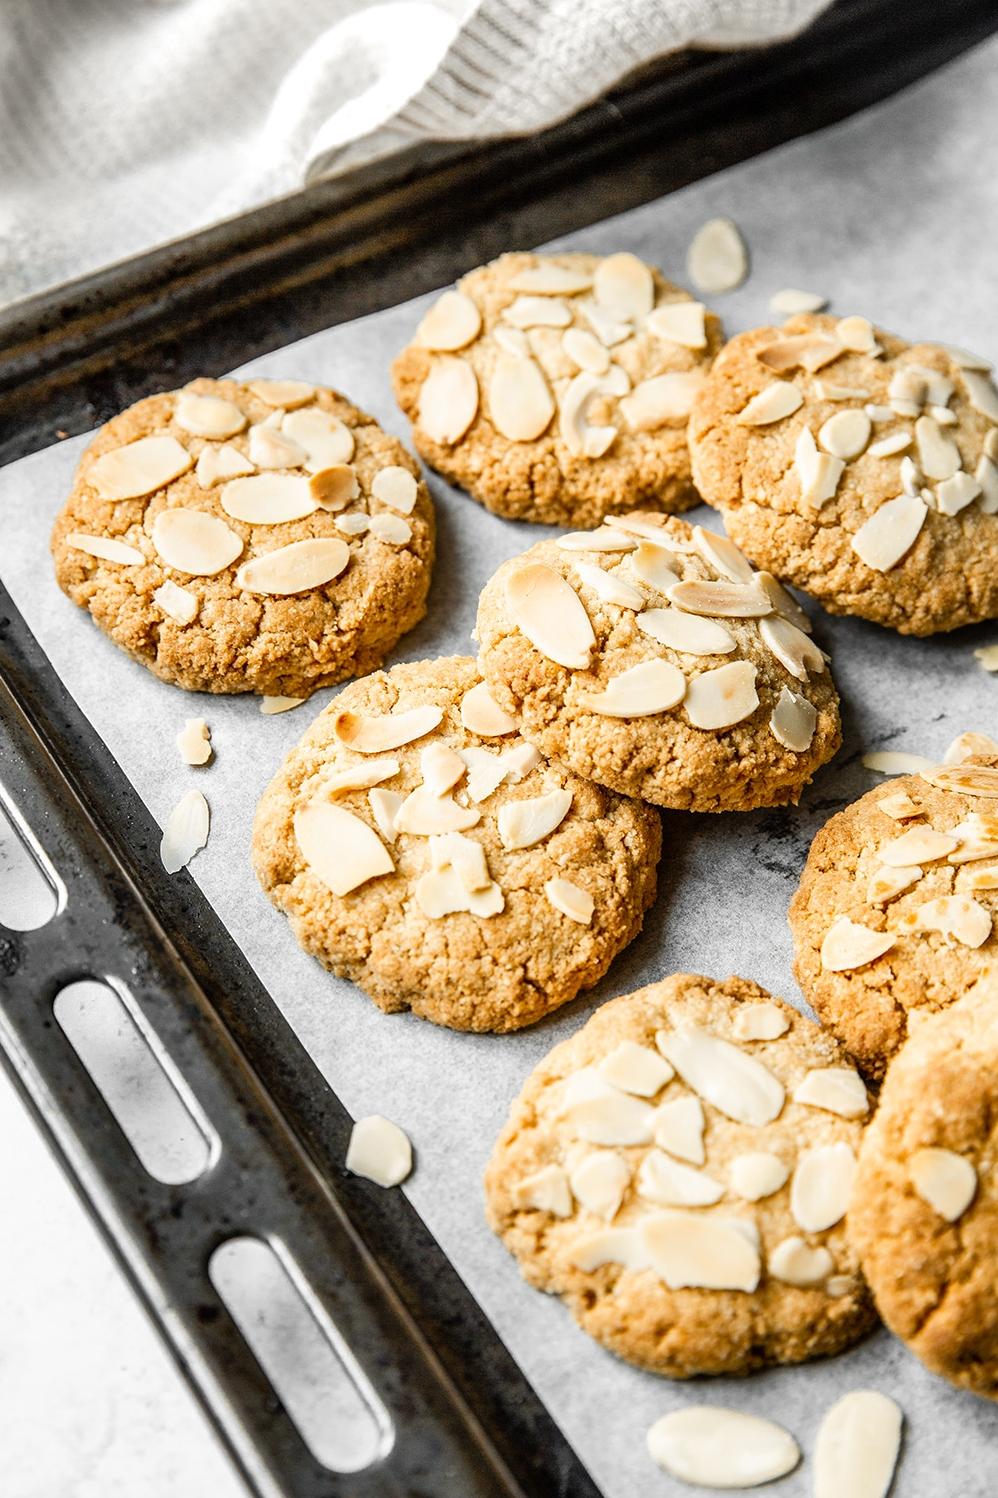  Soft, chewy, and packed with almond flavor. What else could you ask for?